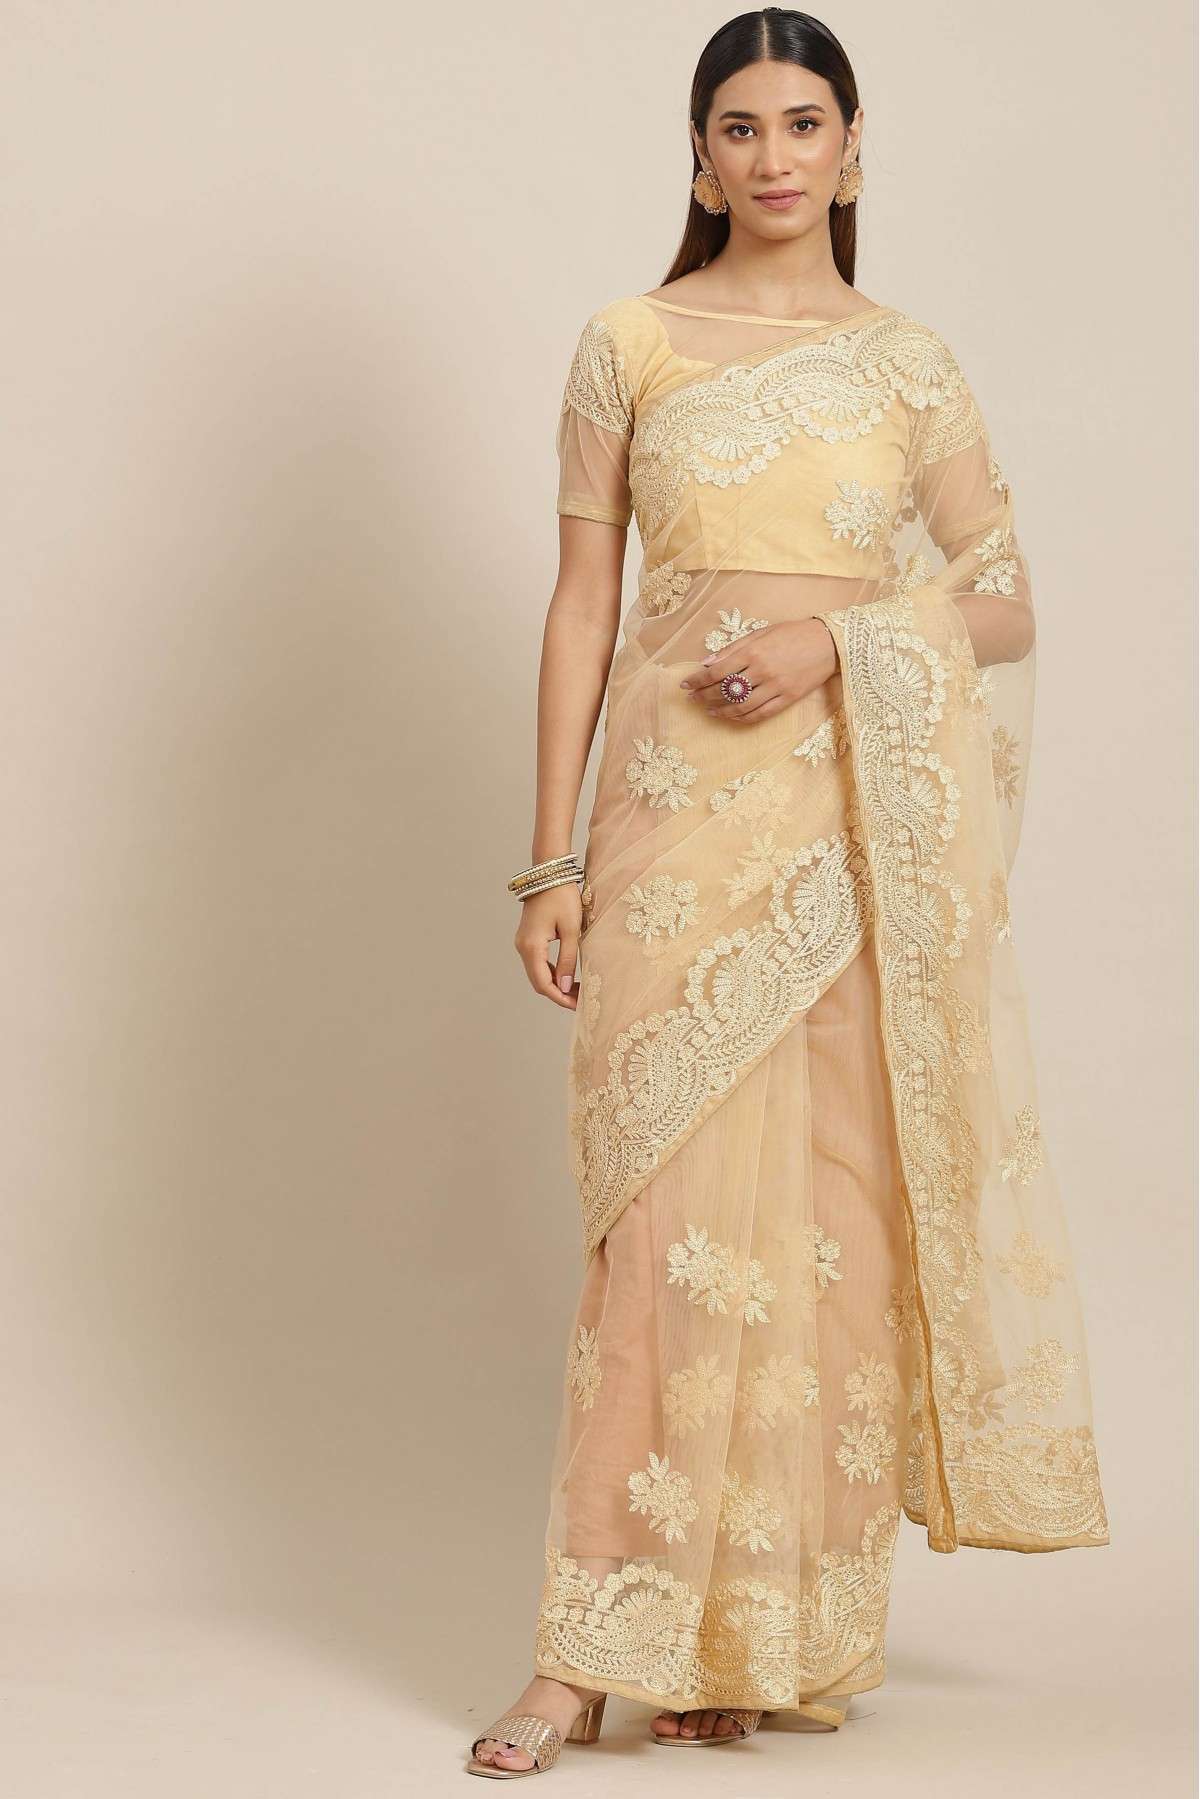 Net Embroidery Saree In Beige Colour - SR5415856